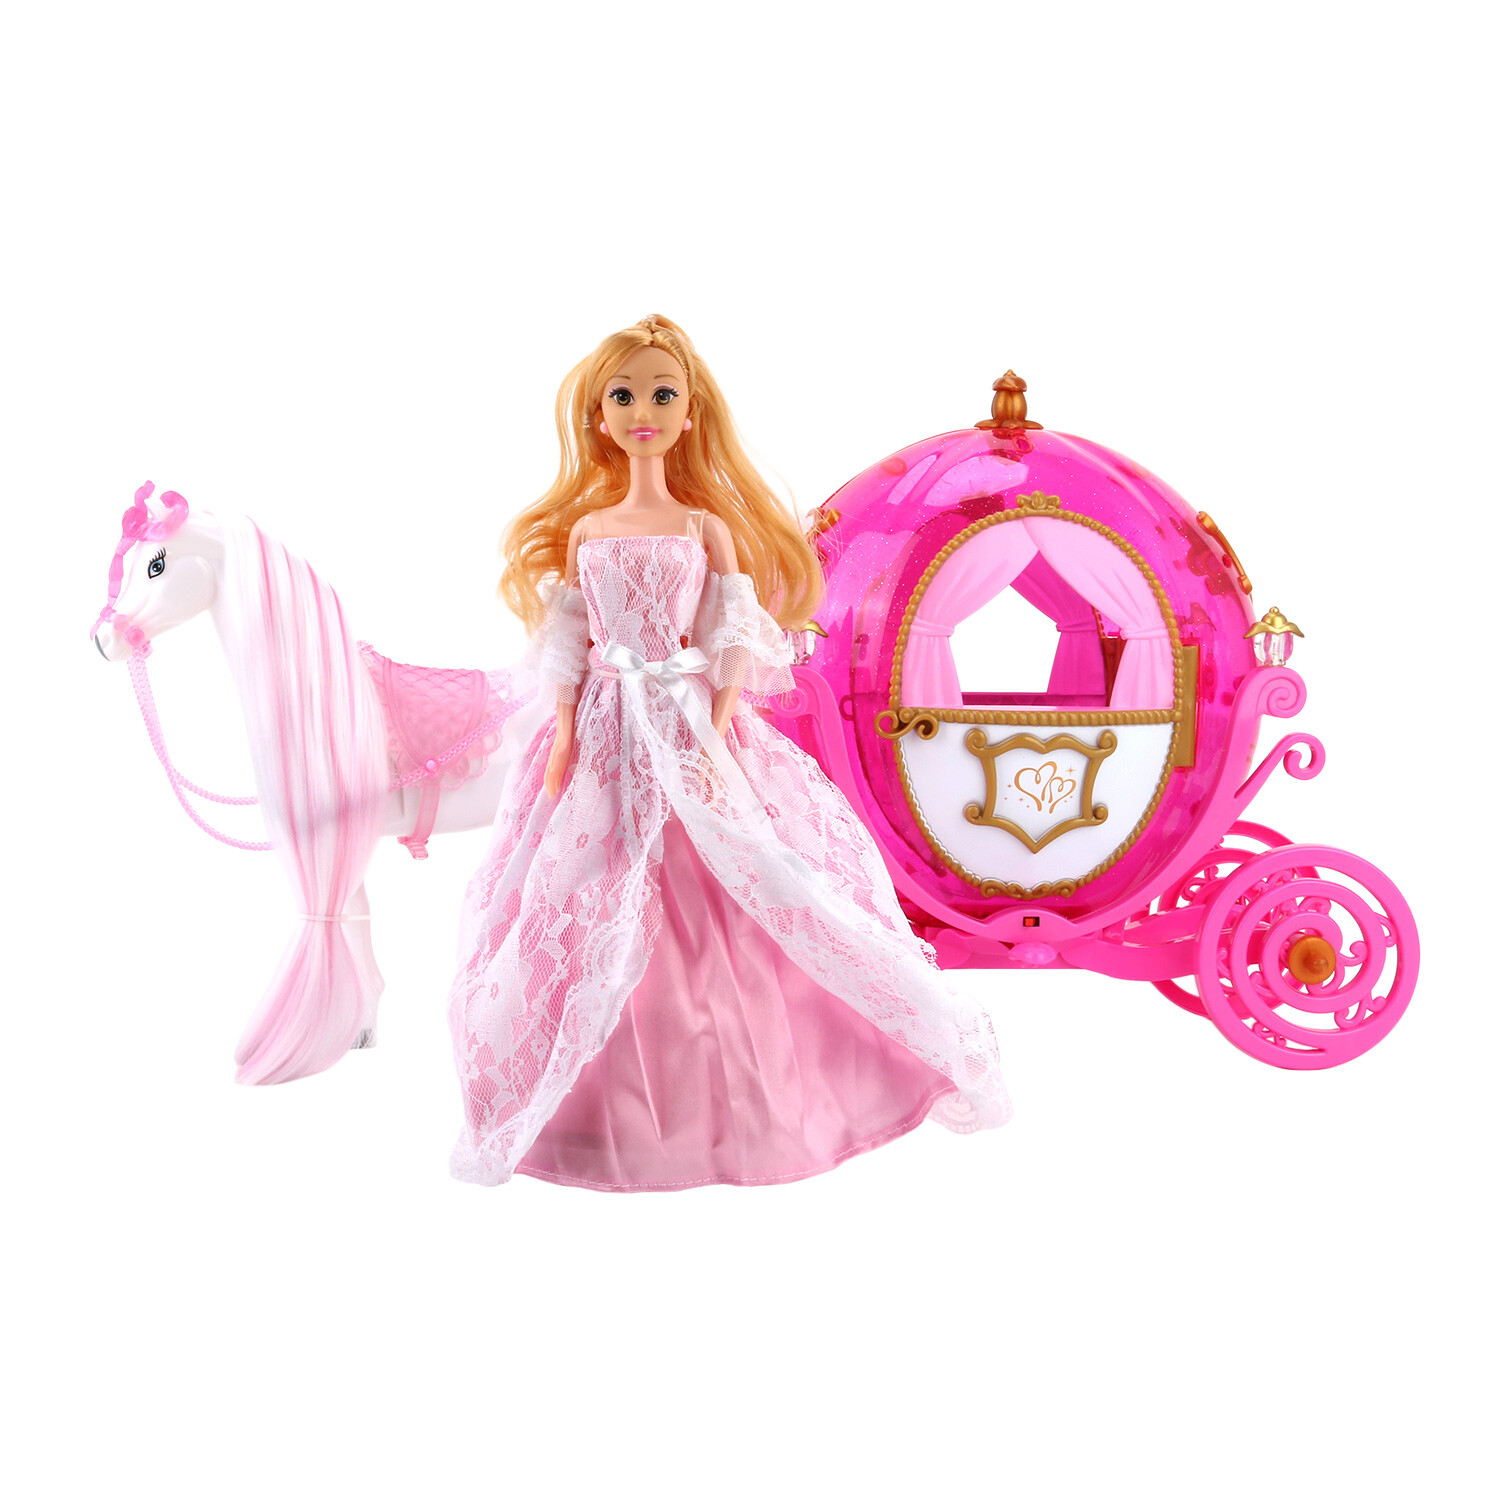 Doll's Carriage with Horse - Pink Image 1